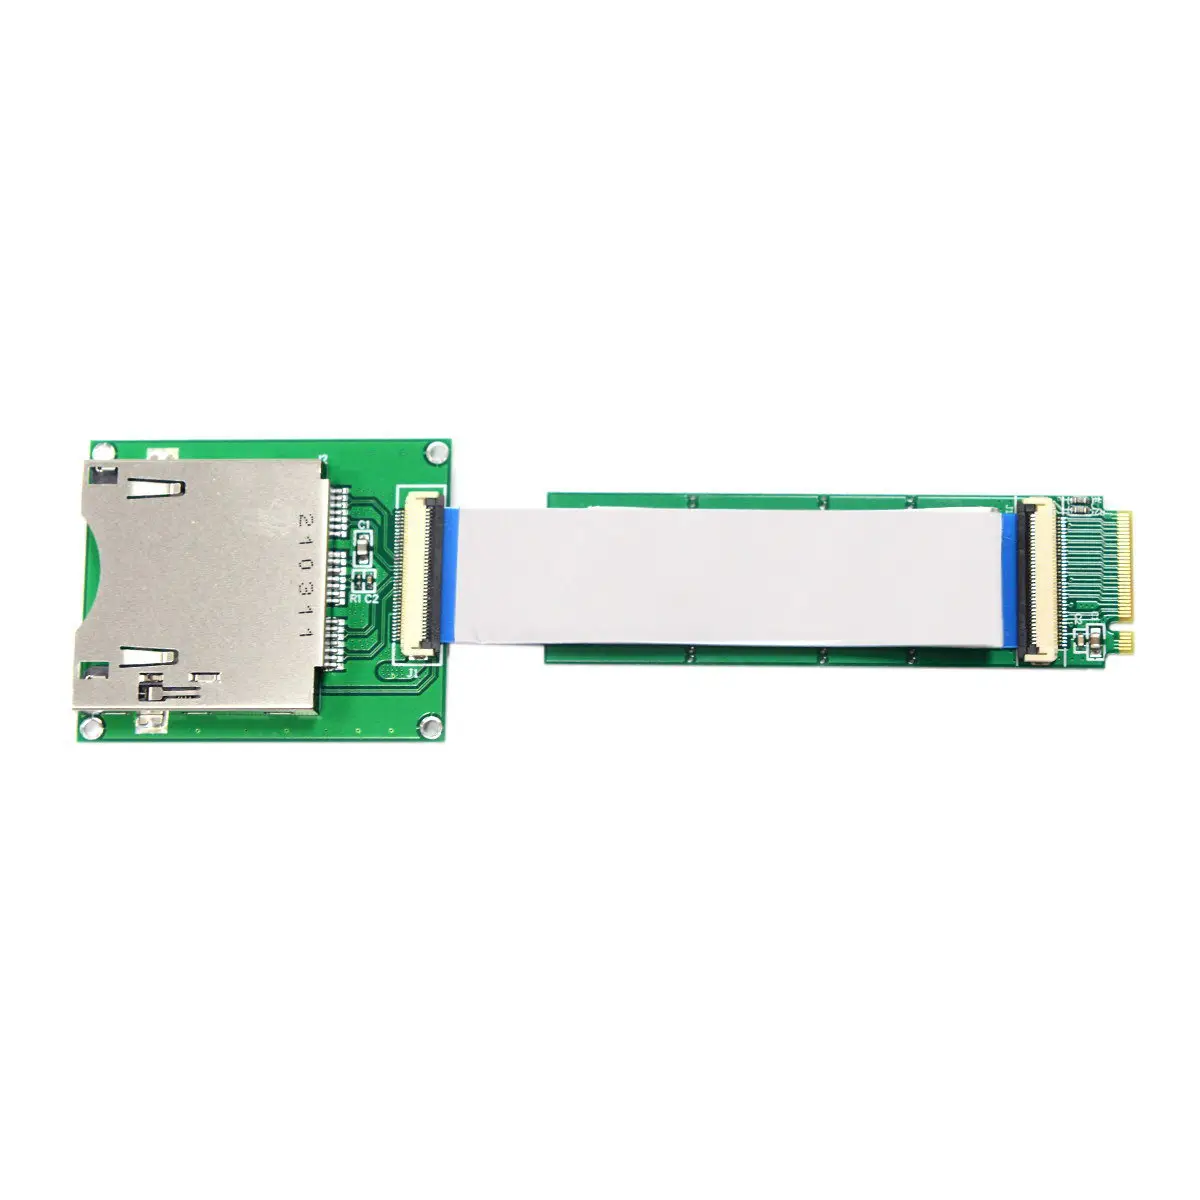 

CY M2 M-key for CFE Type-B NGFF M.2 NVMe Mainboard to CF Express Extension Cable Support R5 Z6 Z7 Memory Card